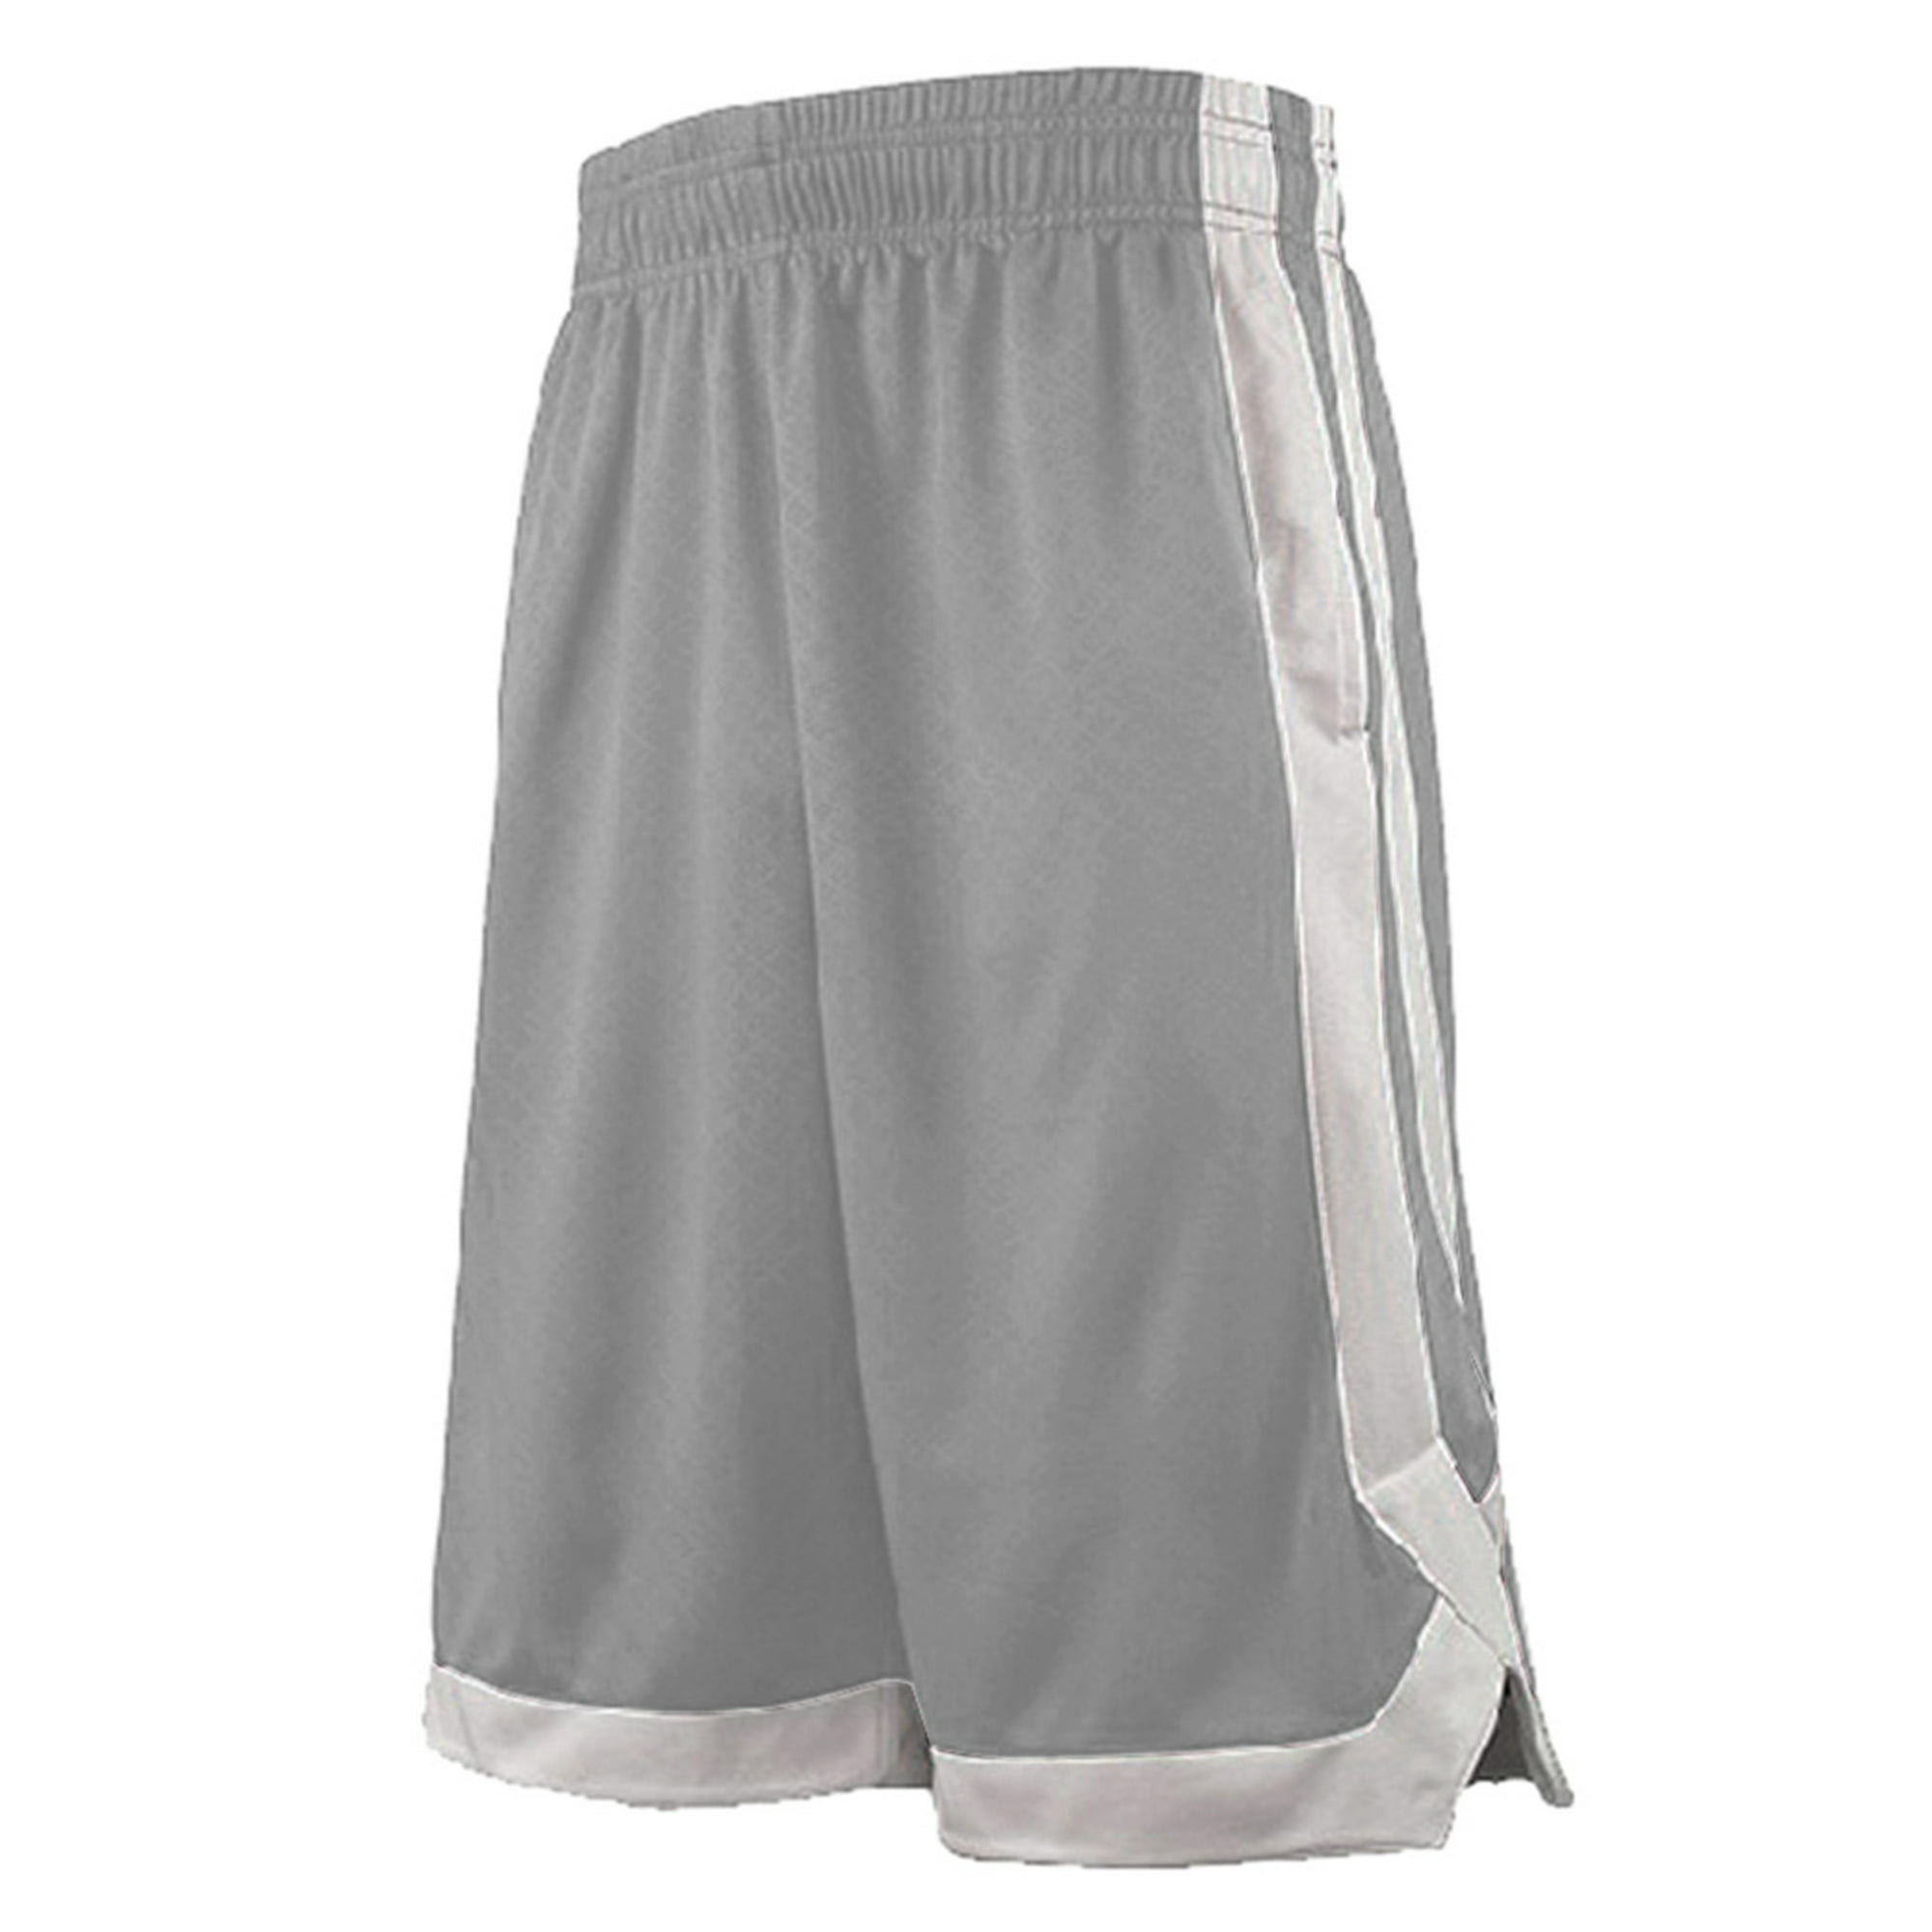 Mens Sports Short Quick Dry Polyester Vintage Basketball Shorts with Pocket(A001,X-Small)  at  Men's Clothing store